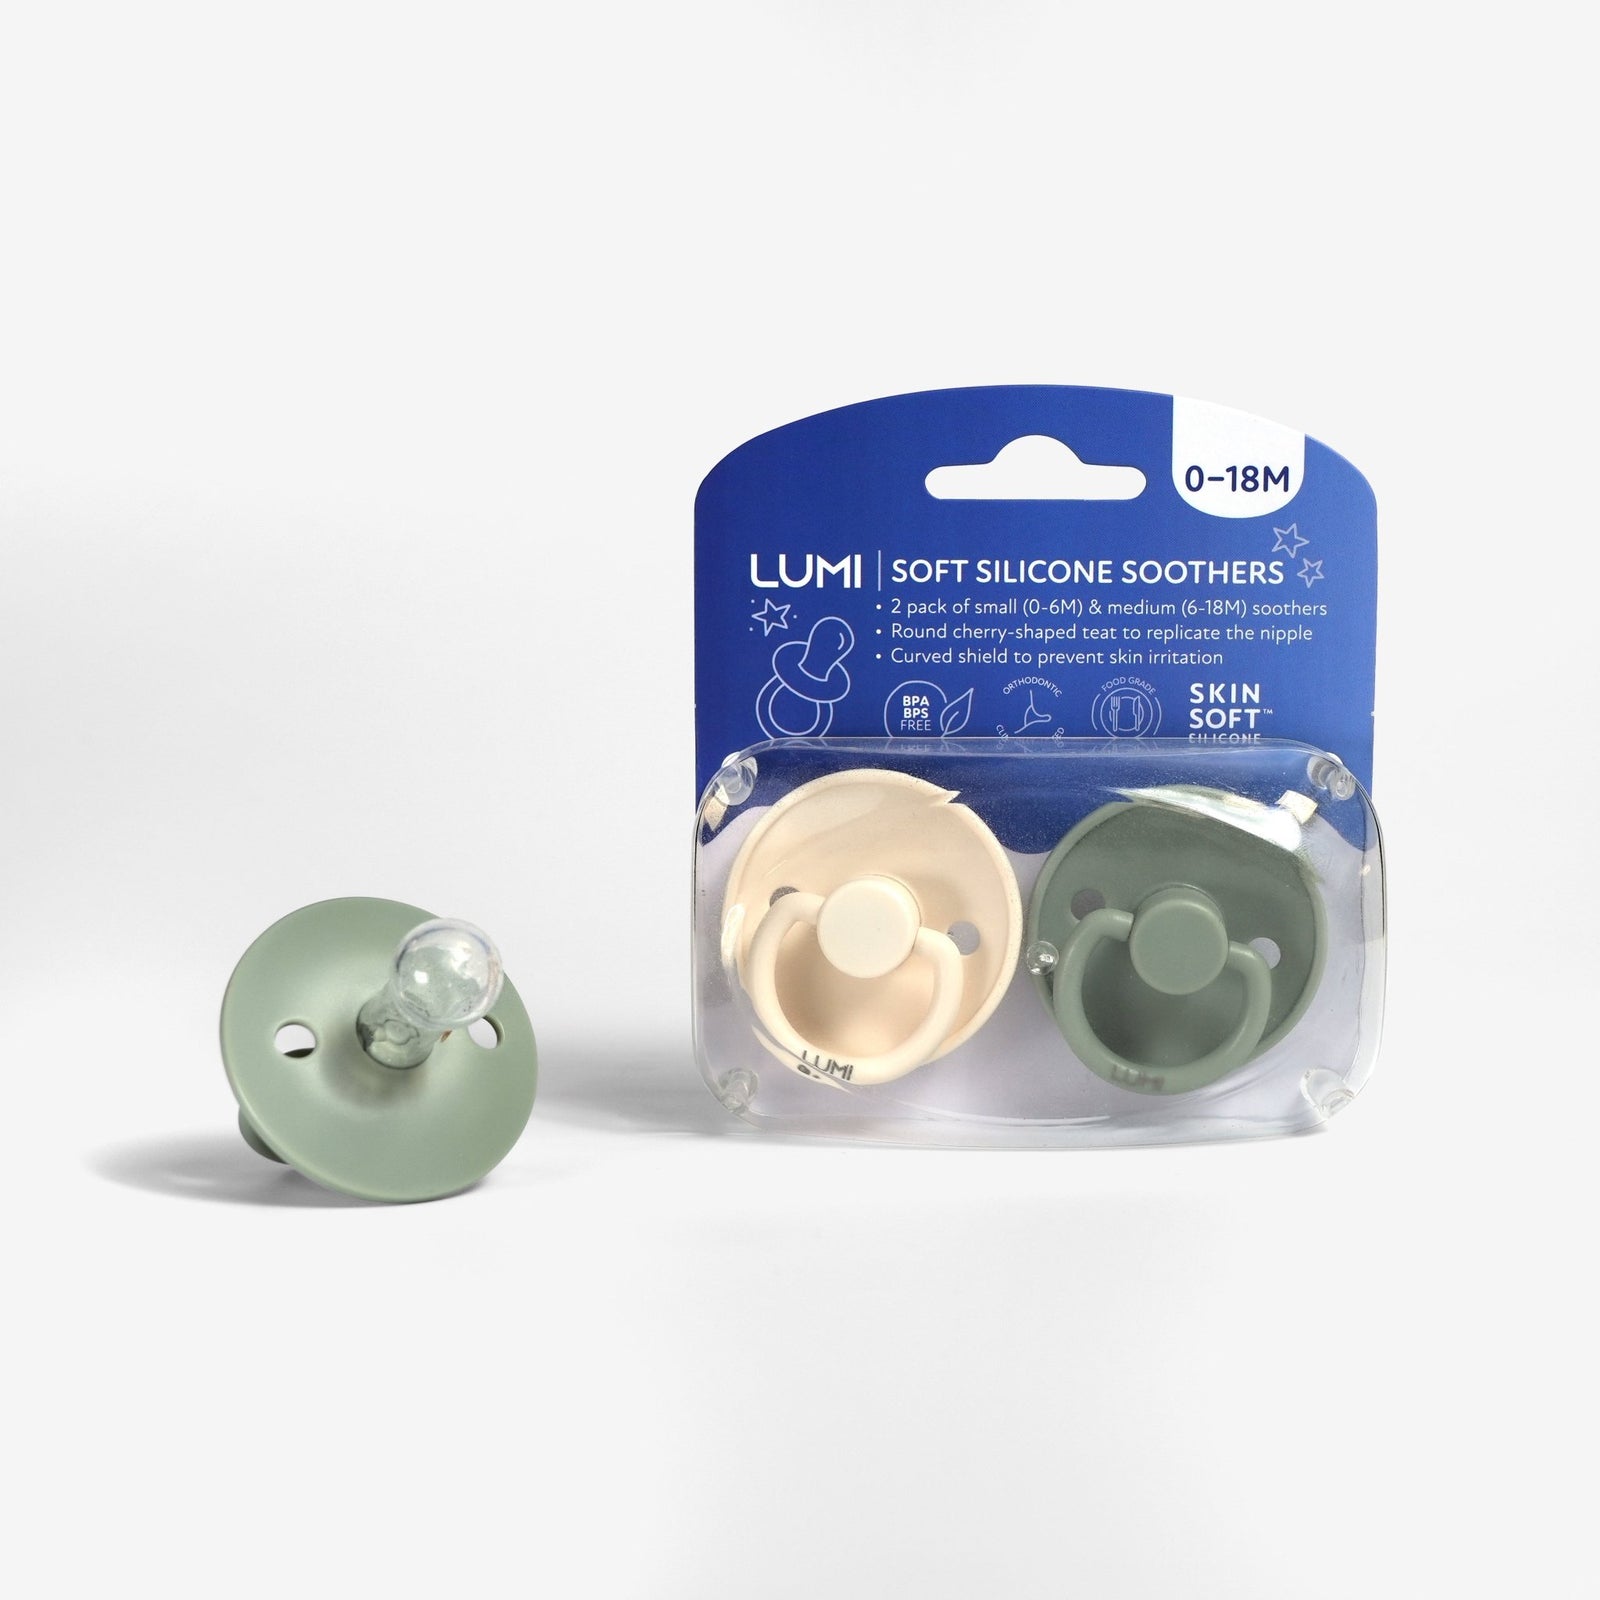 LUMI Soft Silicone Soothers - 2 Pack - LUMI Sleep